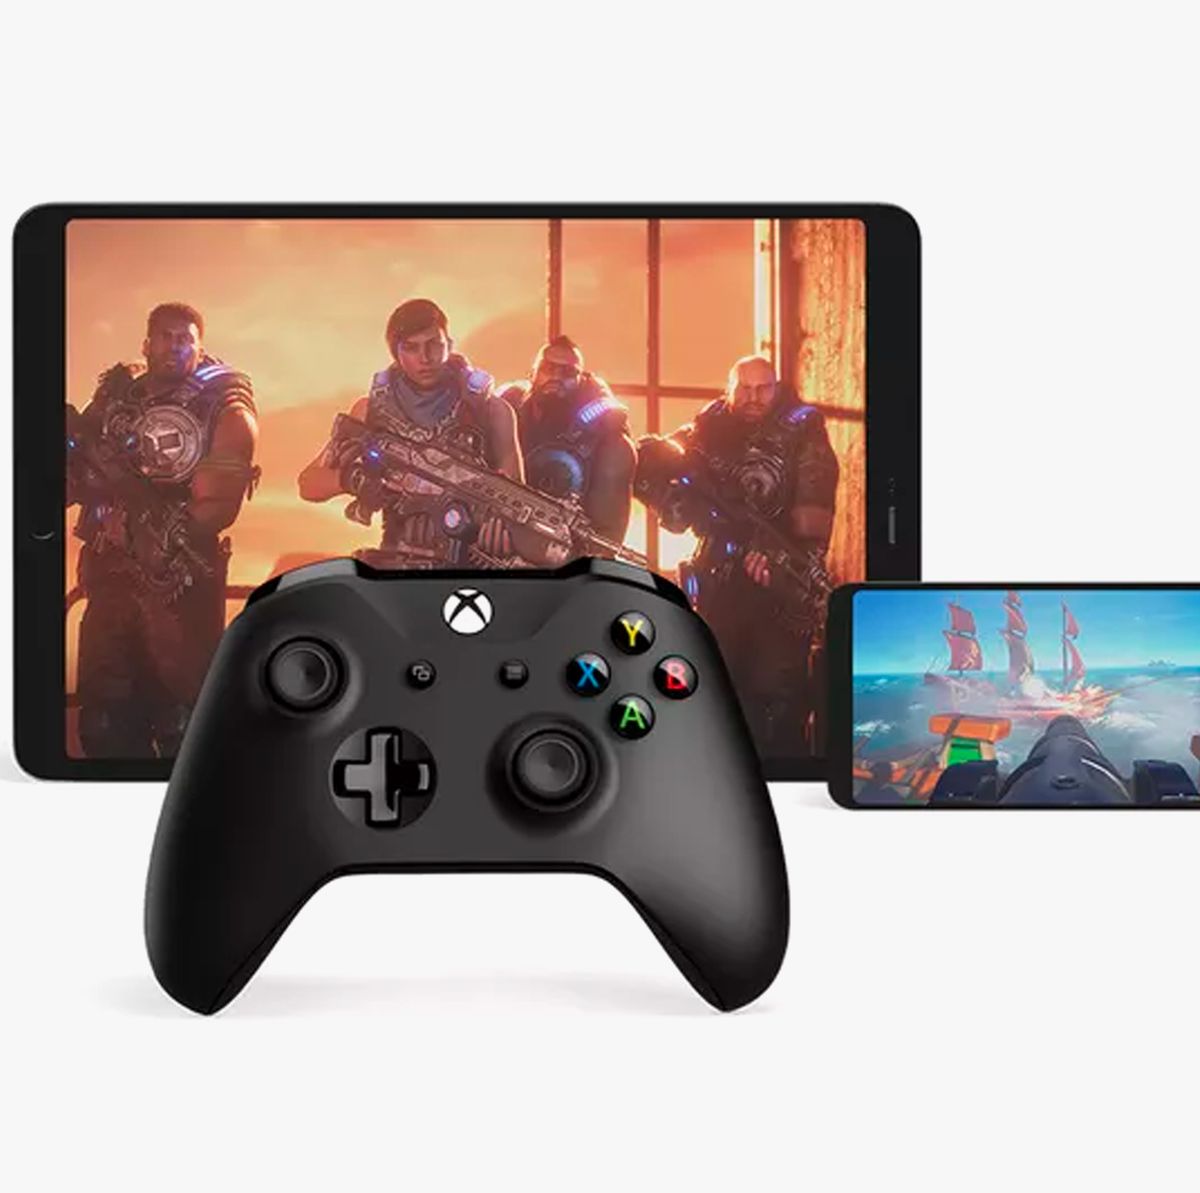 Every Xbox Game Pass for Android (xCloud) game available right now